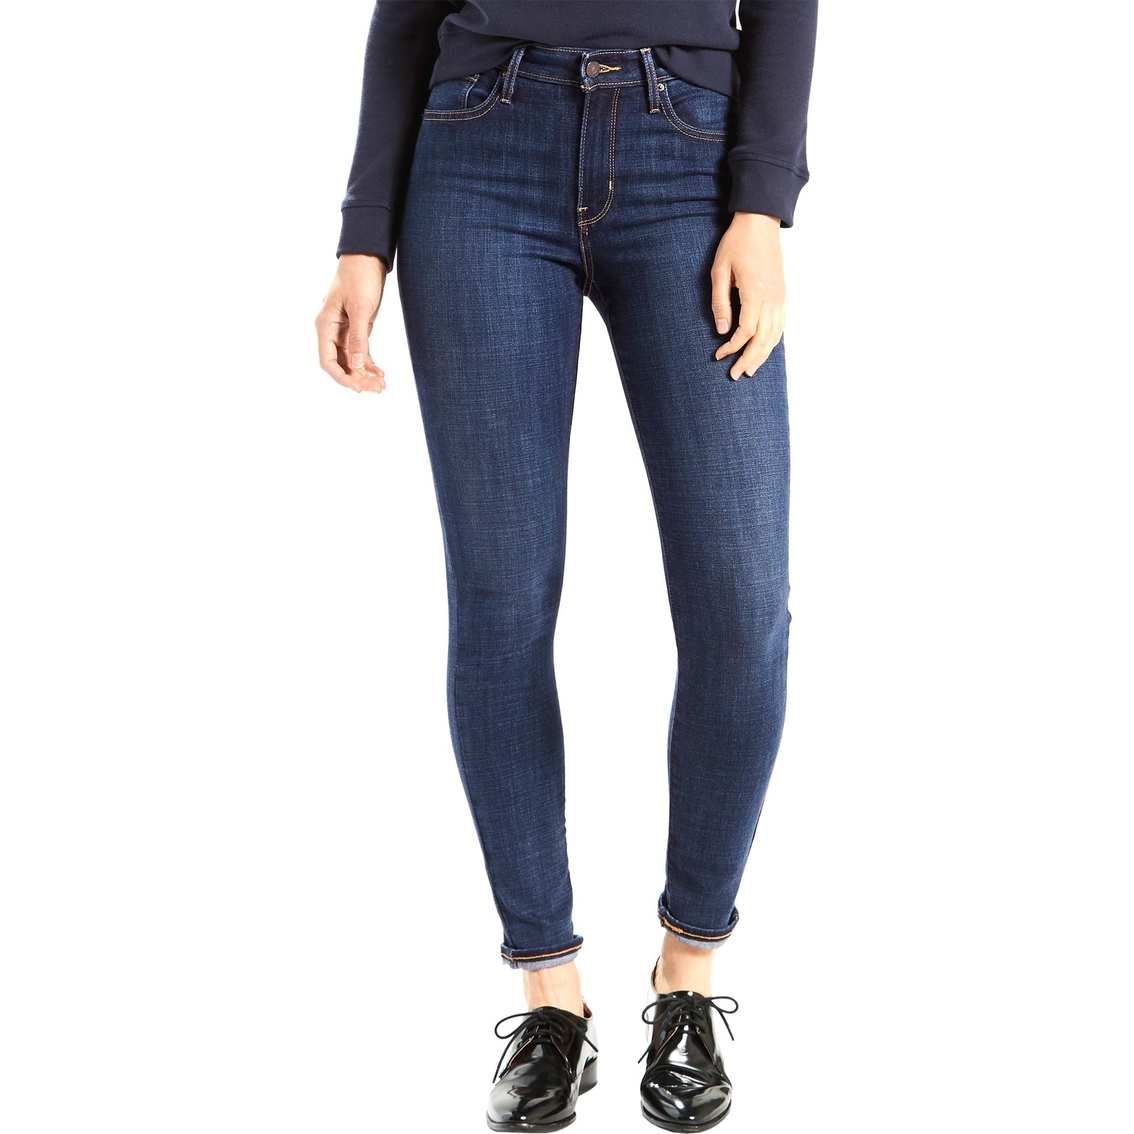 Levi's 721 High Rise Skinny Jeans | Saturday - Wk 77 | Shop The Exchange